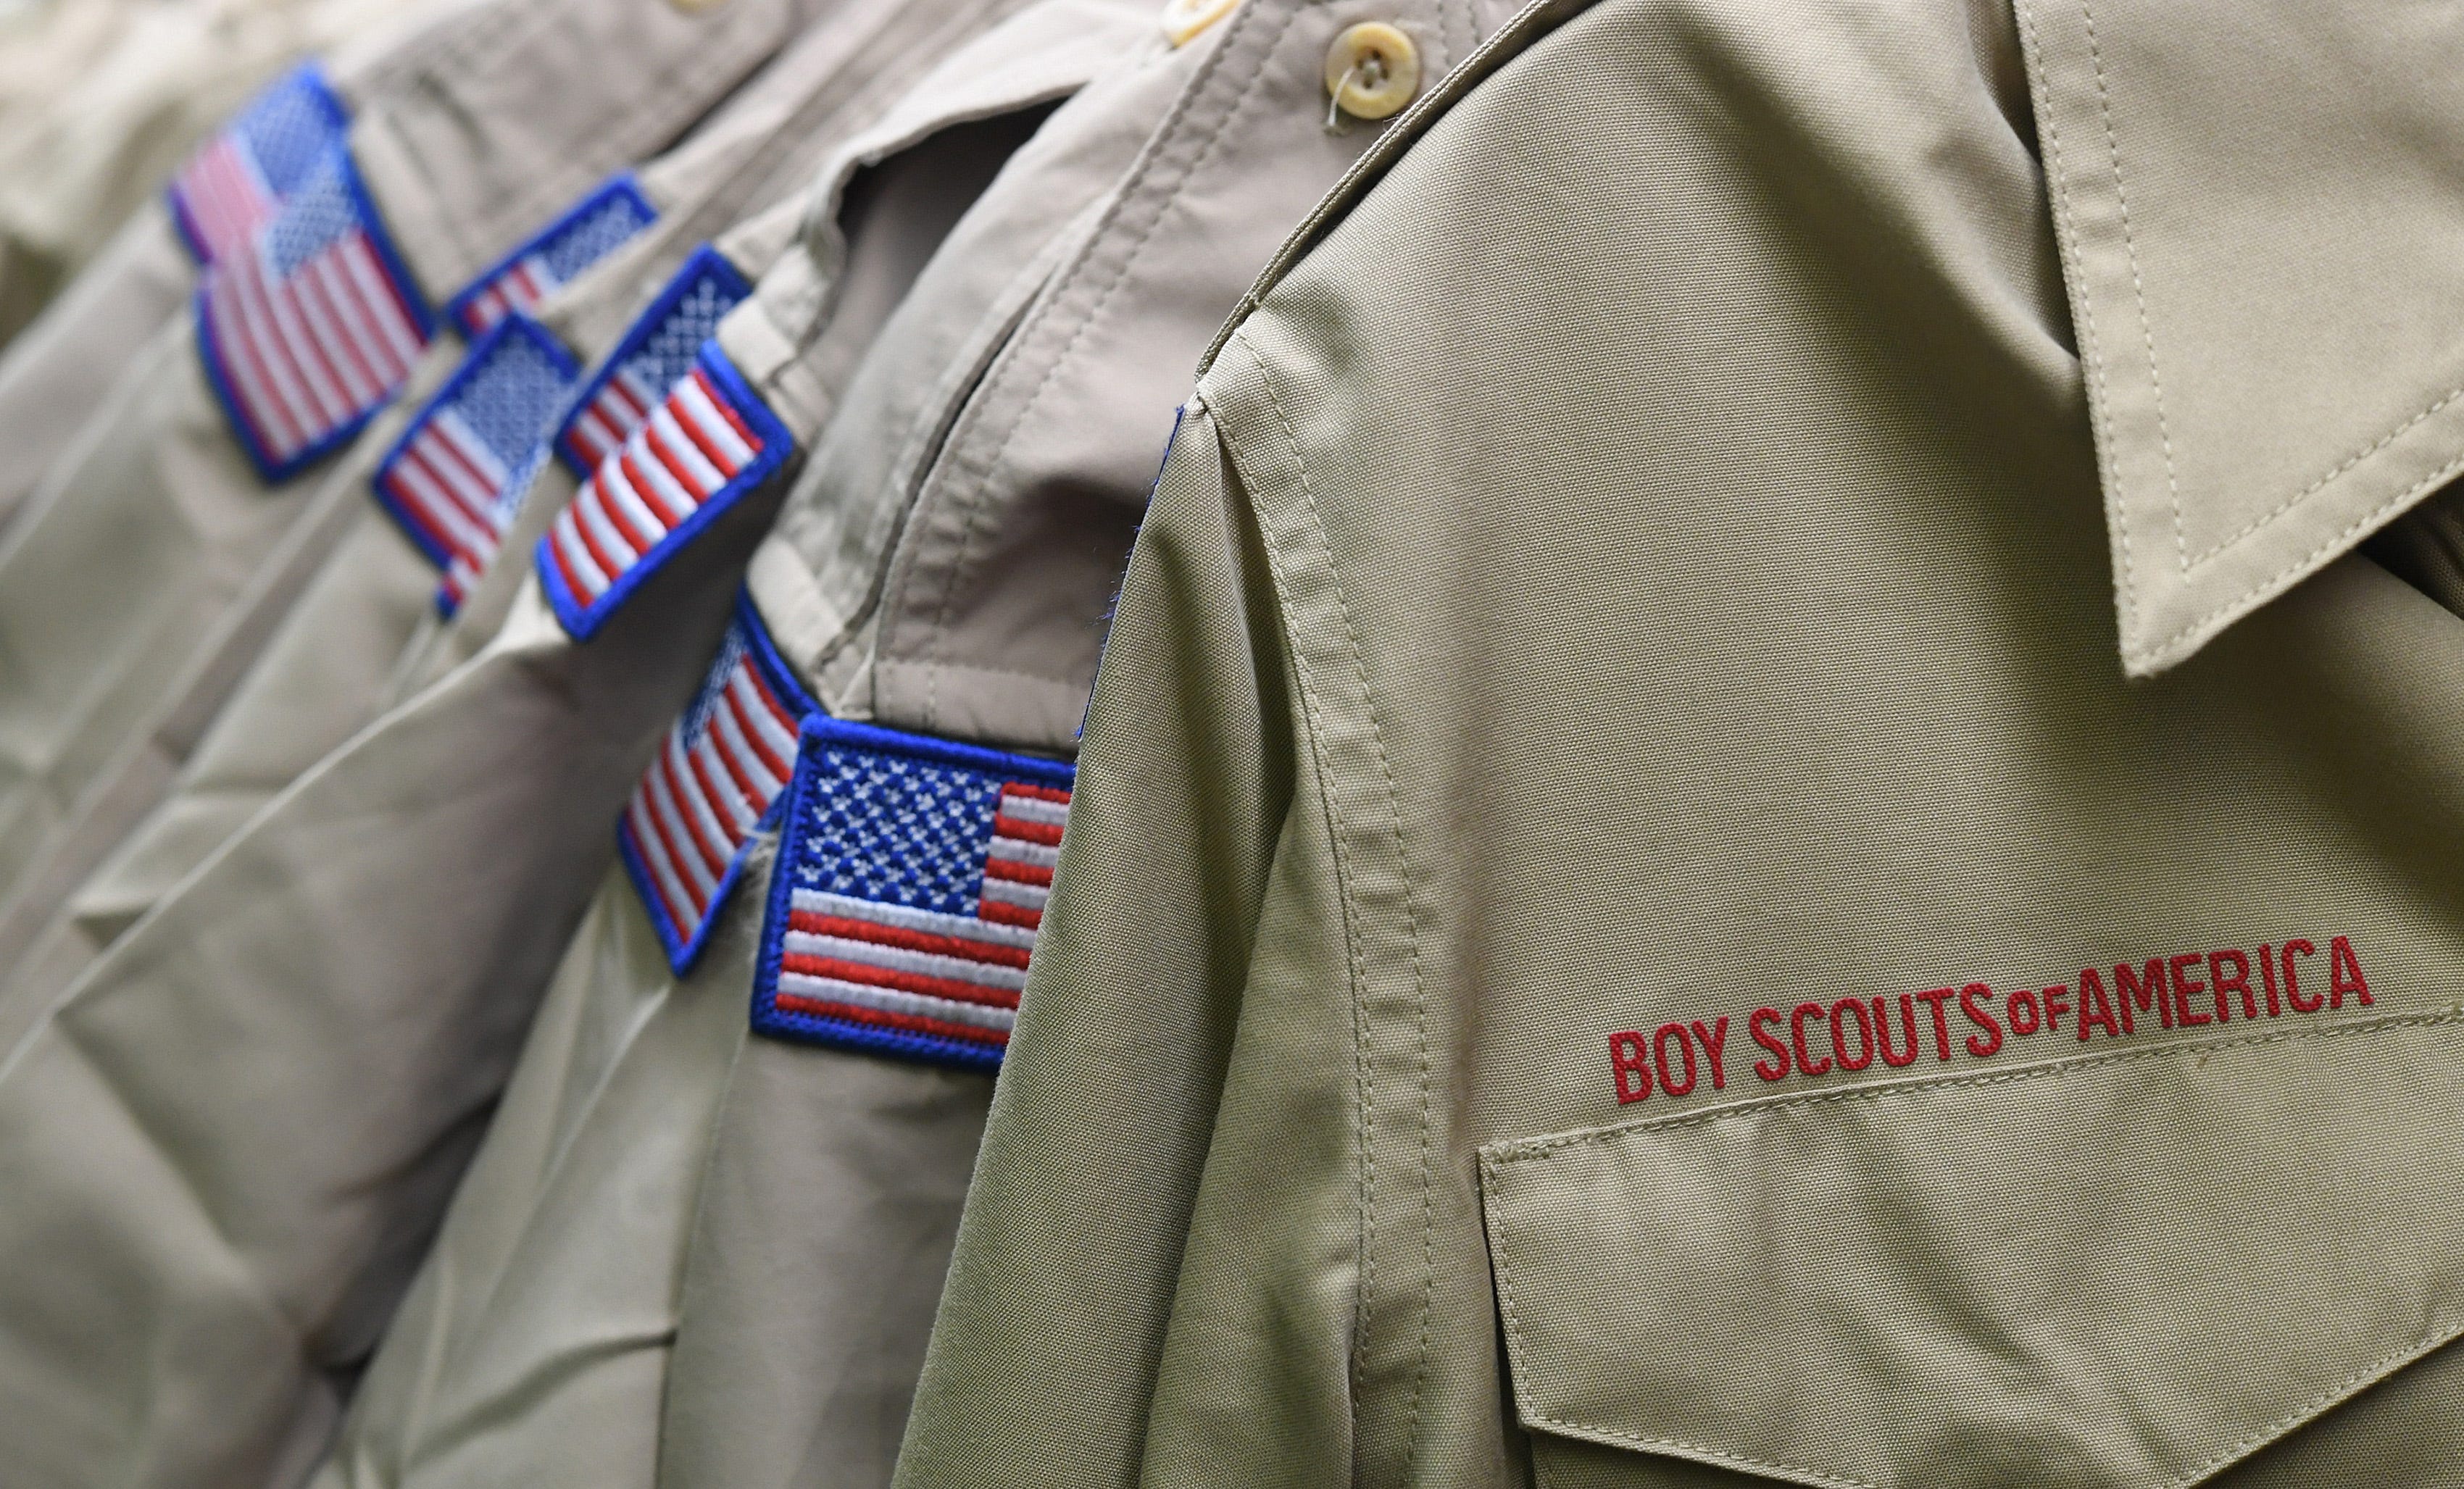 boy scouts of america announces name change to scouting america, in effect next year